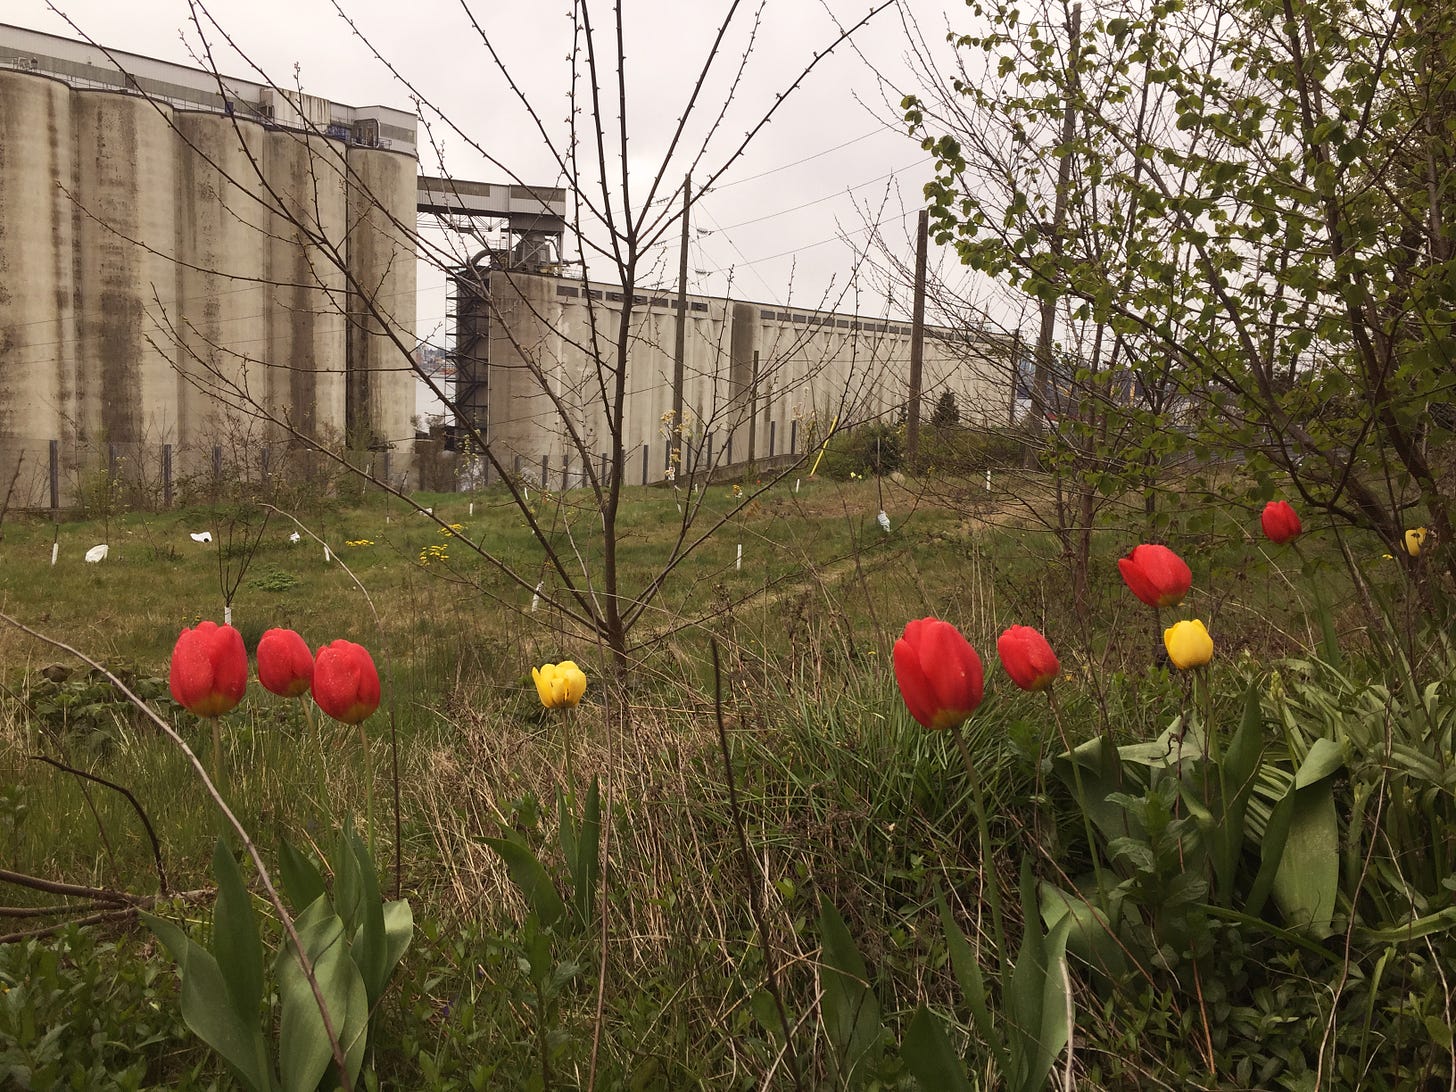 In the foreground, a scattering of yellow and red tulips grows amid long grass. An orchard of tiny trees sits between them and grain silos in the background. The sky is overcast.